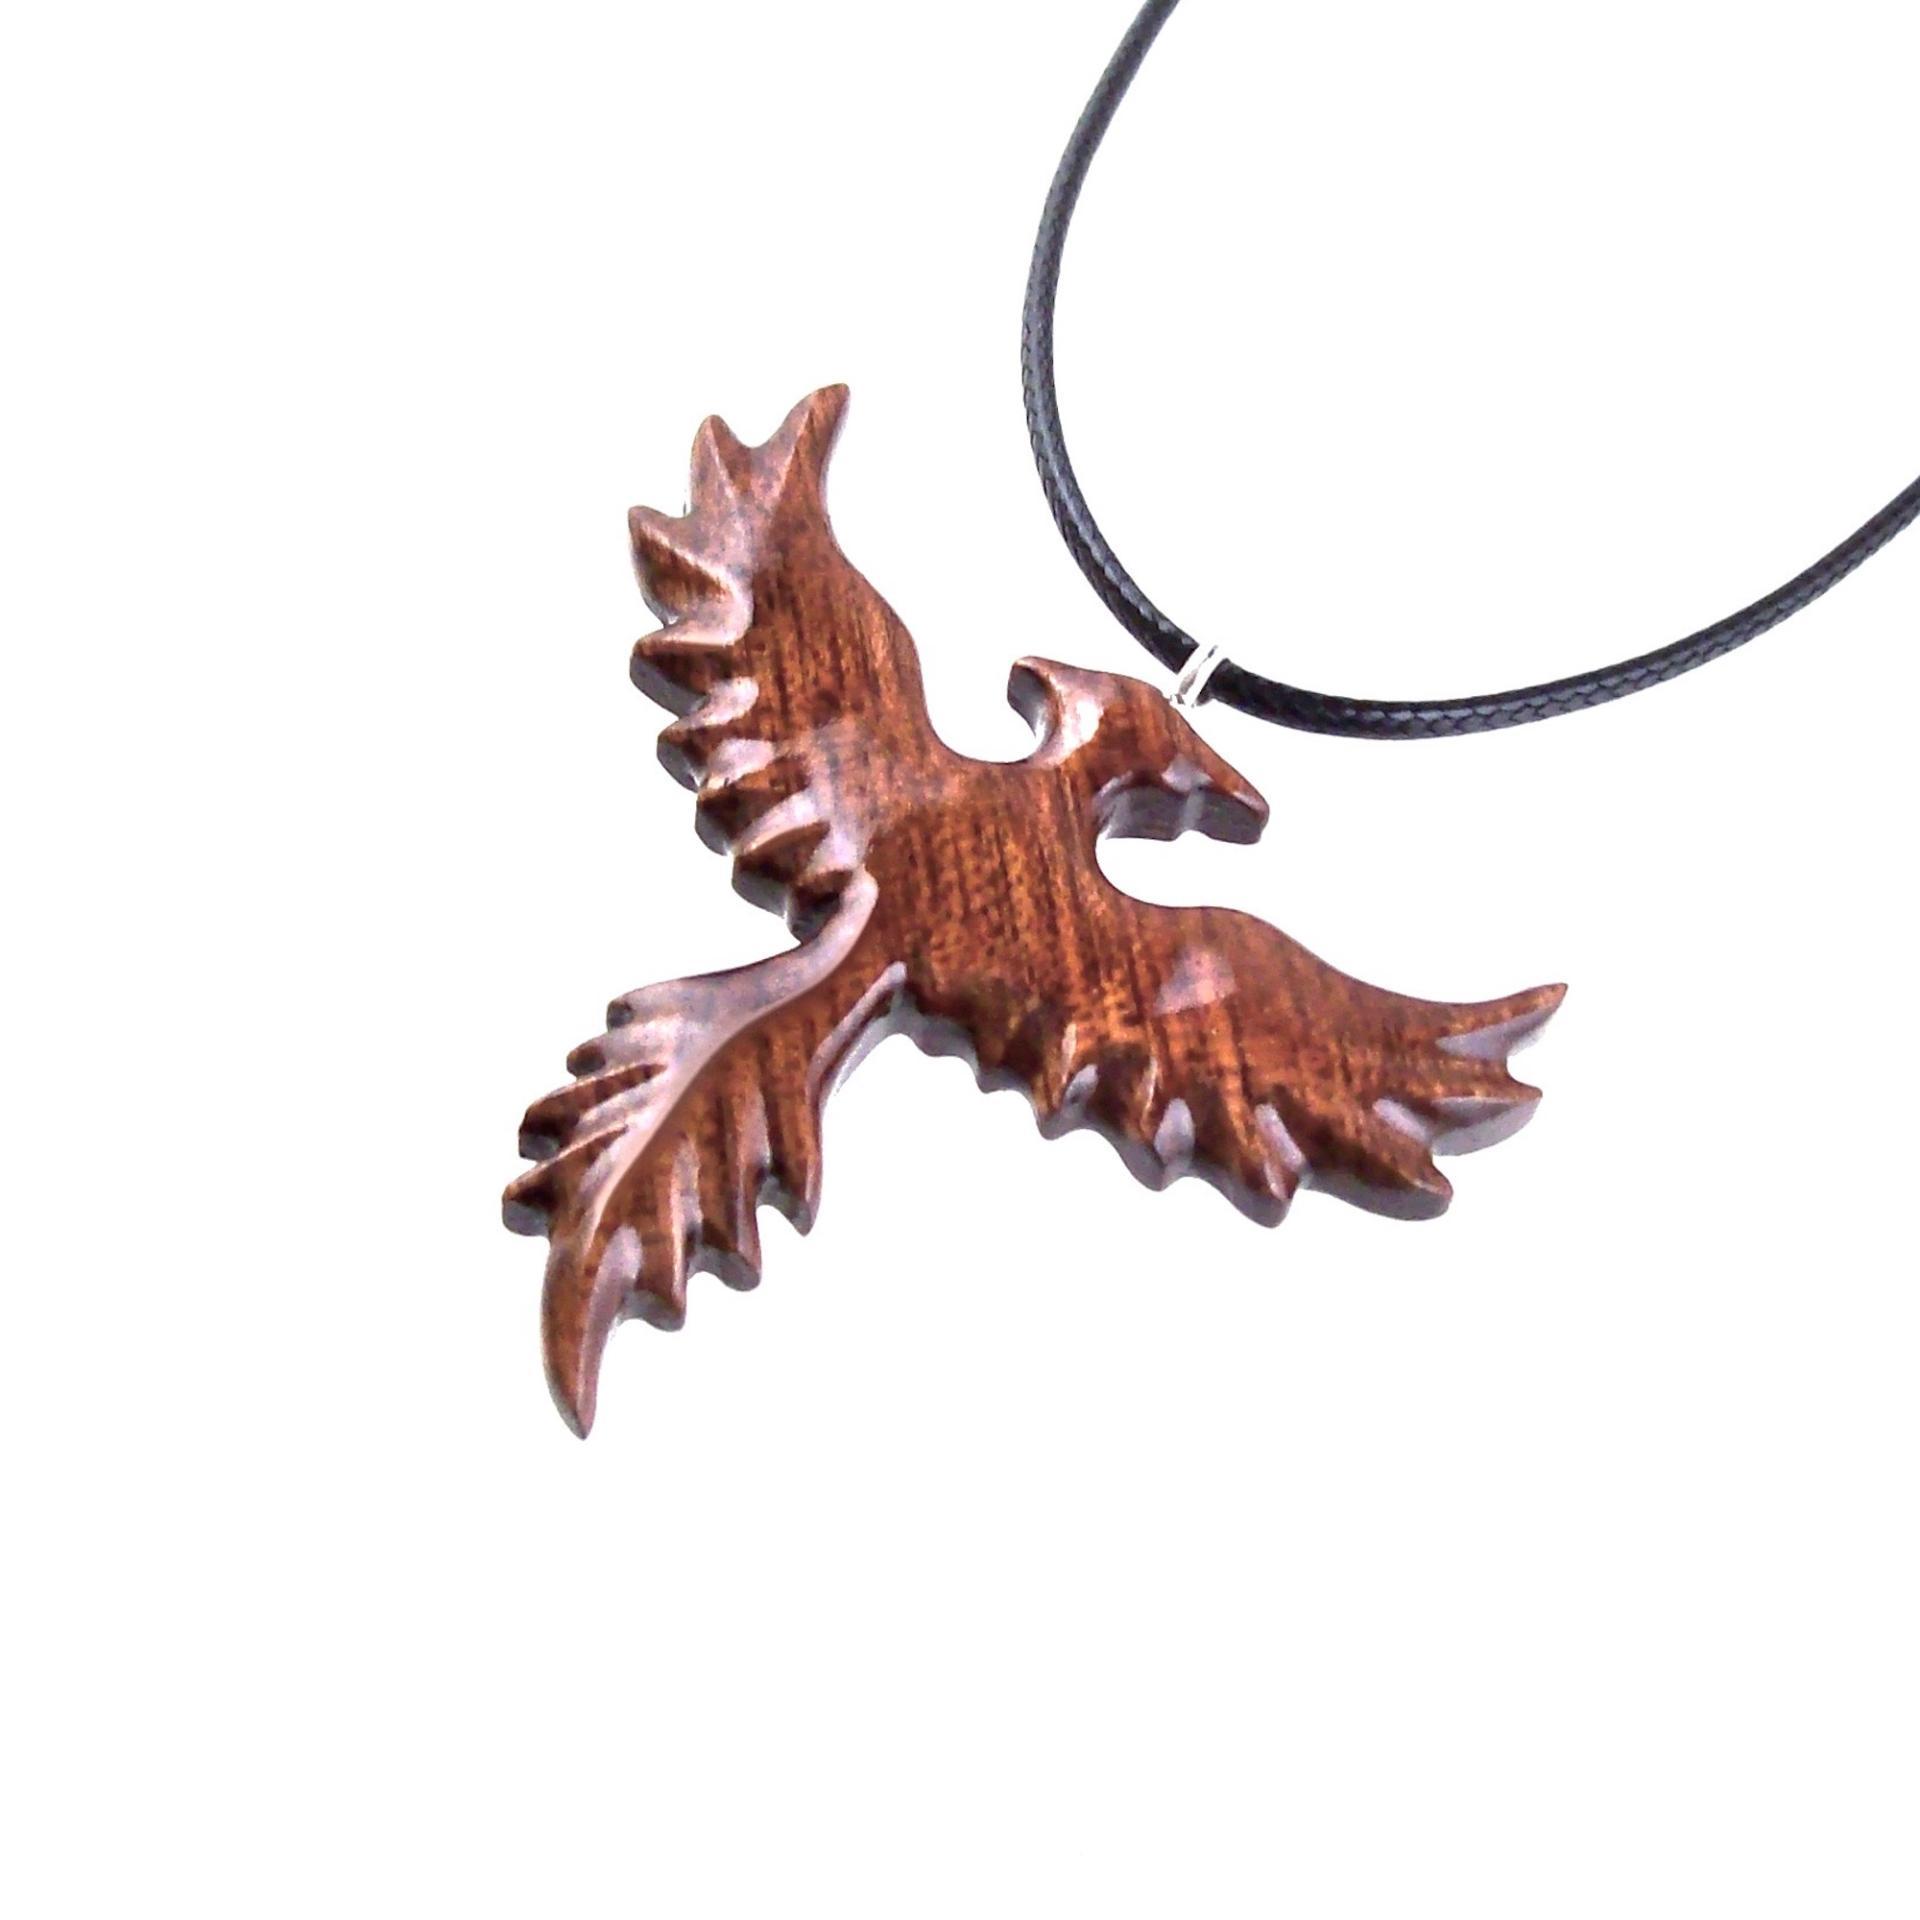 Rising Phoenix Necklace, Hand Carved Wooden Firebird Pendant, Handmade Wood Jewelry, Inspirational Gift for Her Him